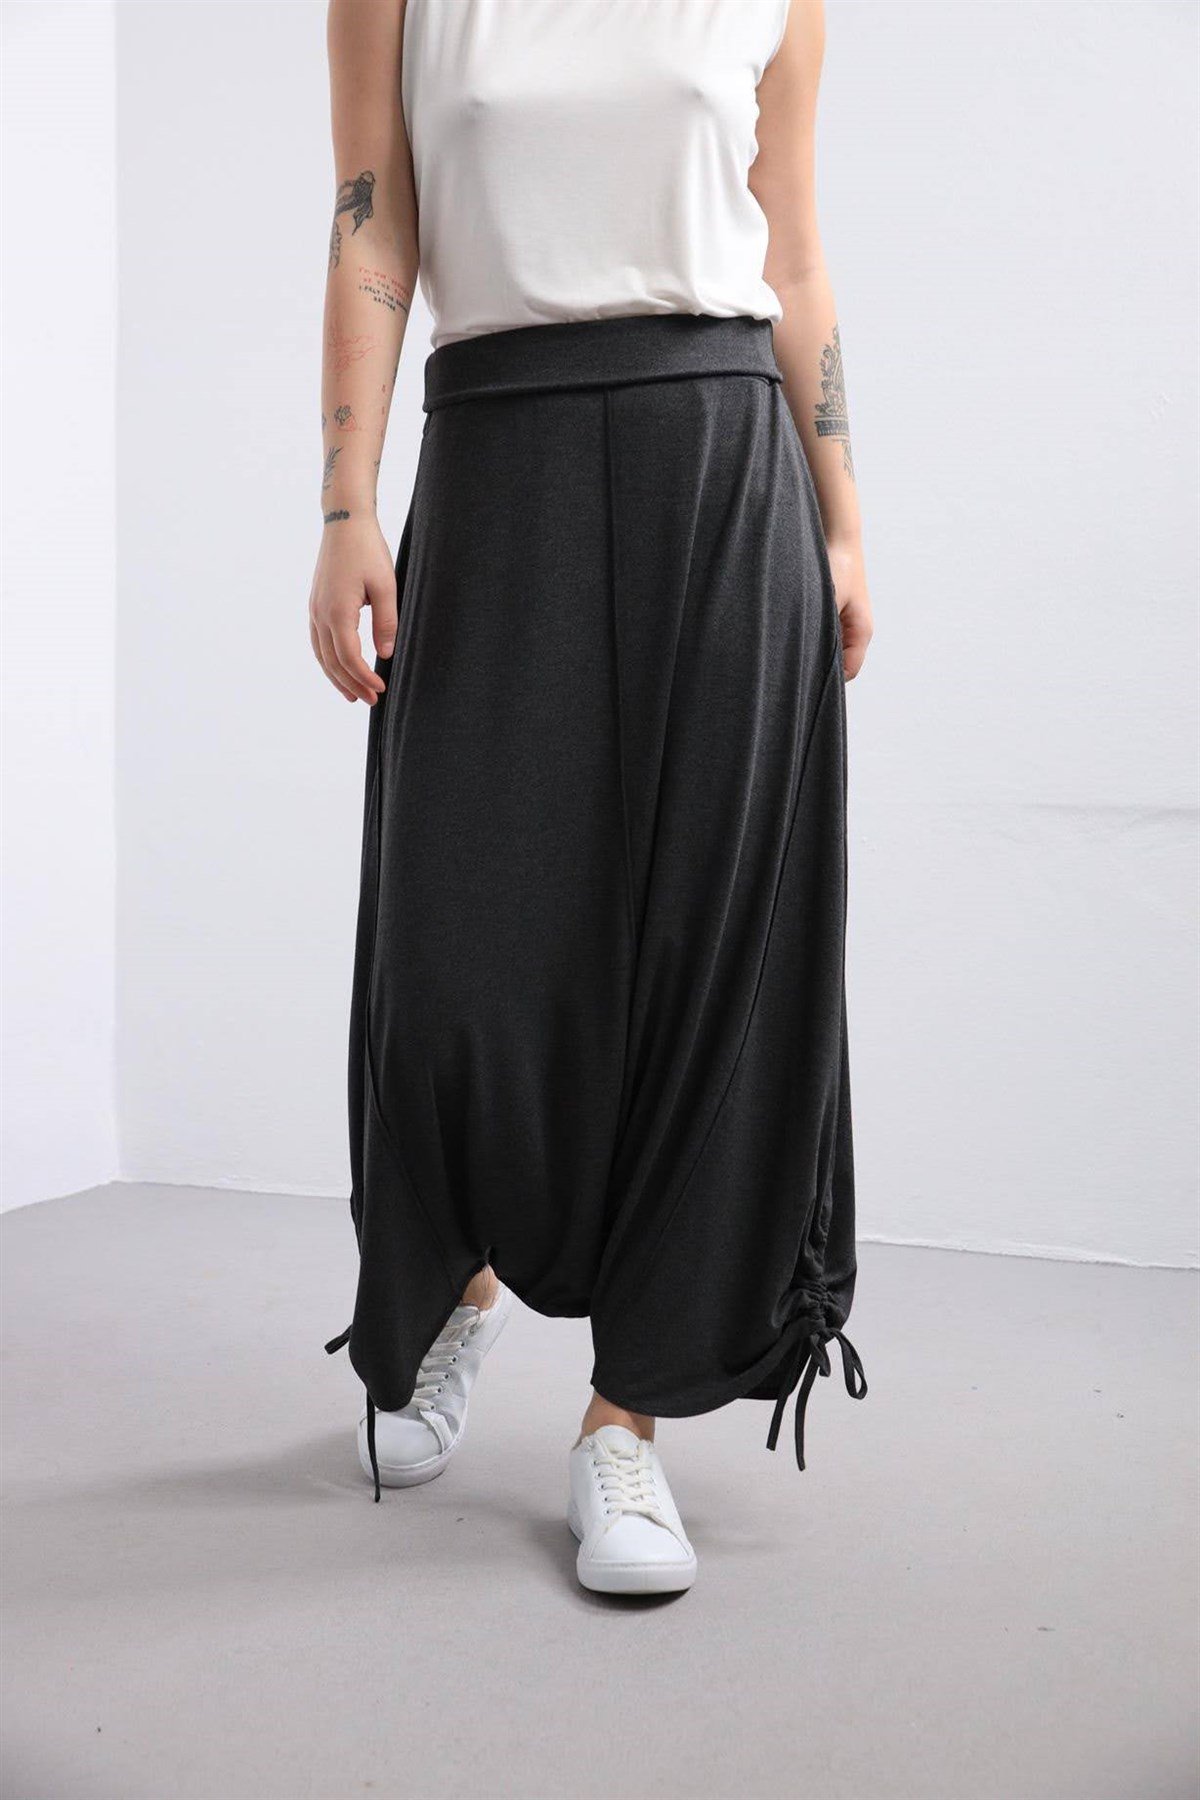 Anthracite Tied Cuff Stitch Detailed Harem Pants